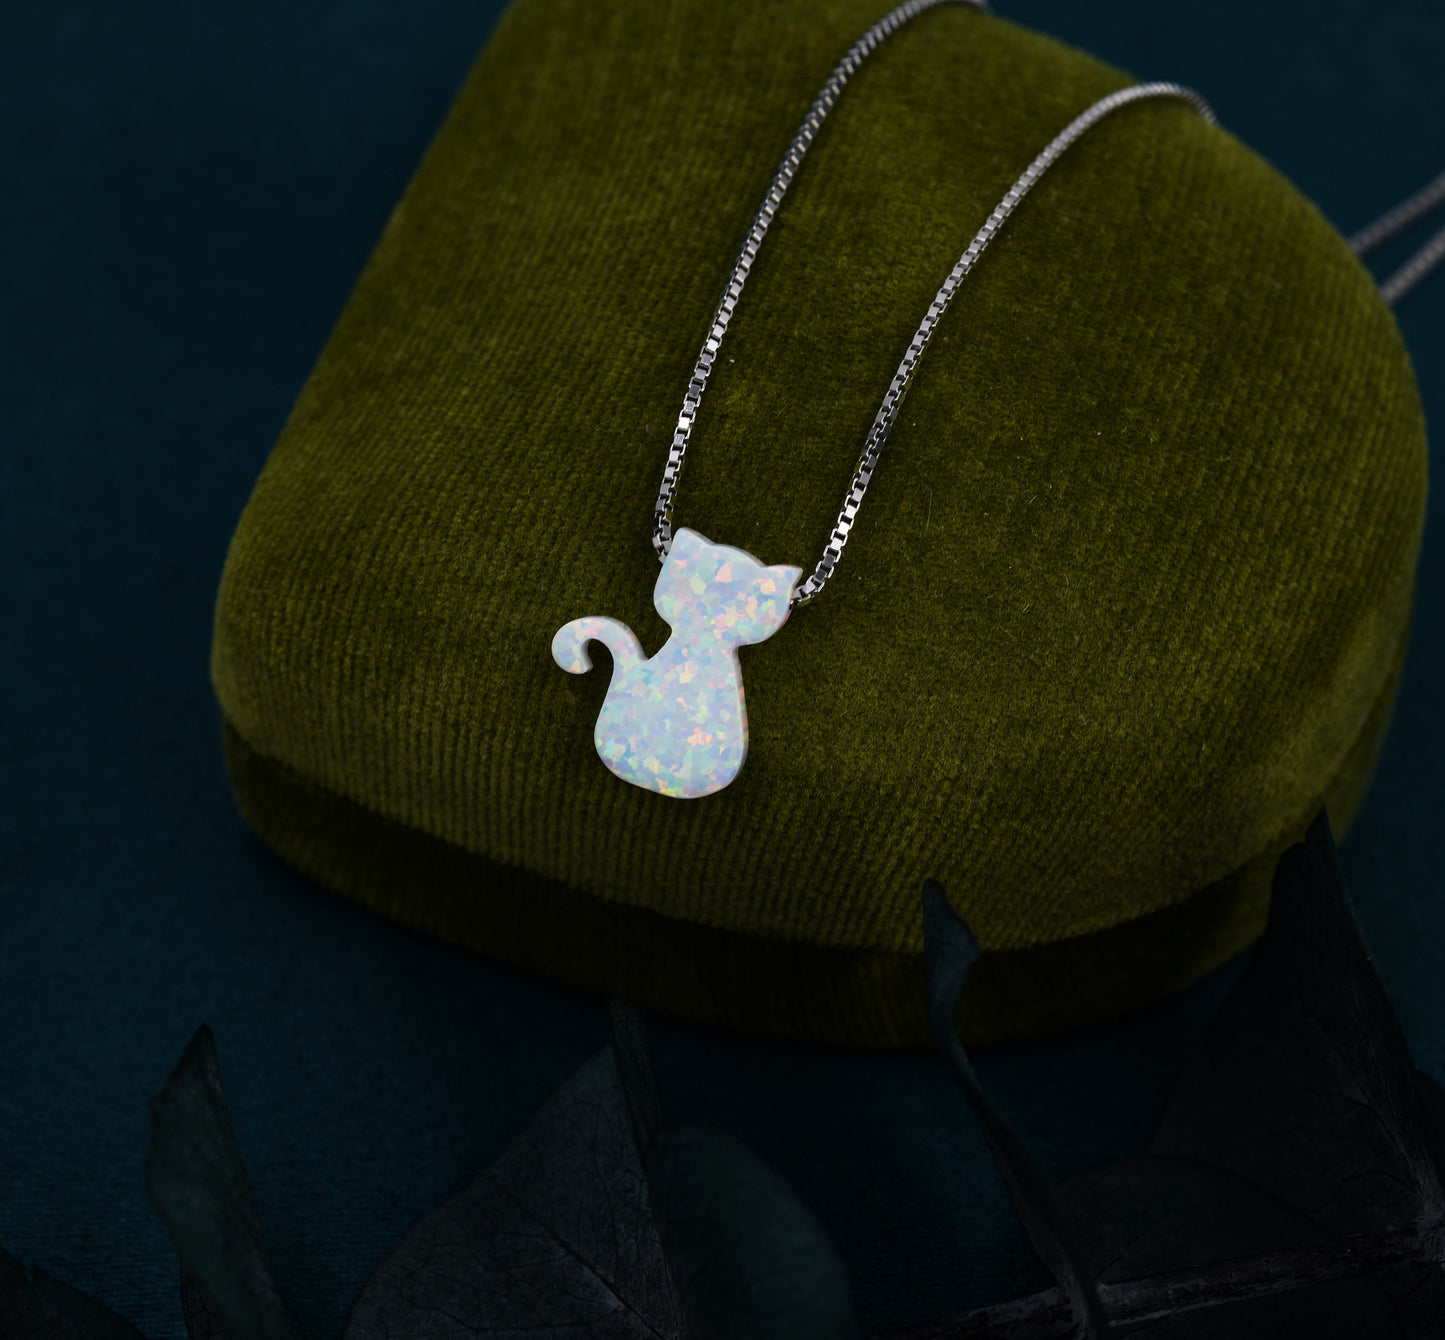 Fire Opal White Stone Little Kitty Cat Pendant Necklace in Sterling Silver. Gold Plated or Rose Gold. Dainty and Delicate. Cute and Quirky